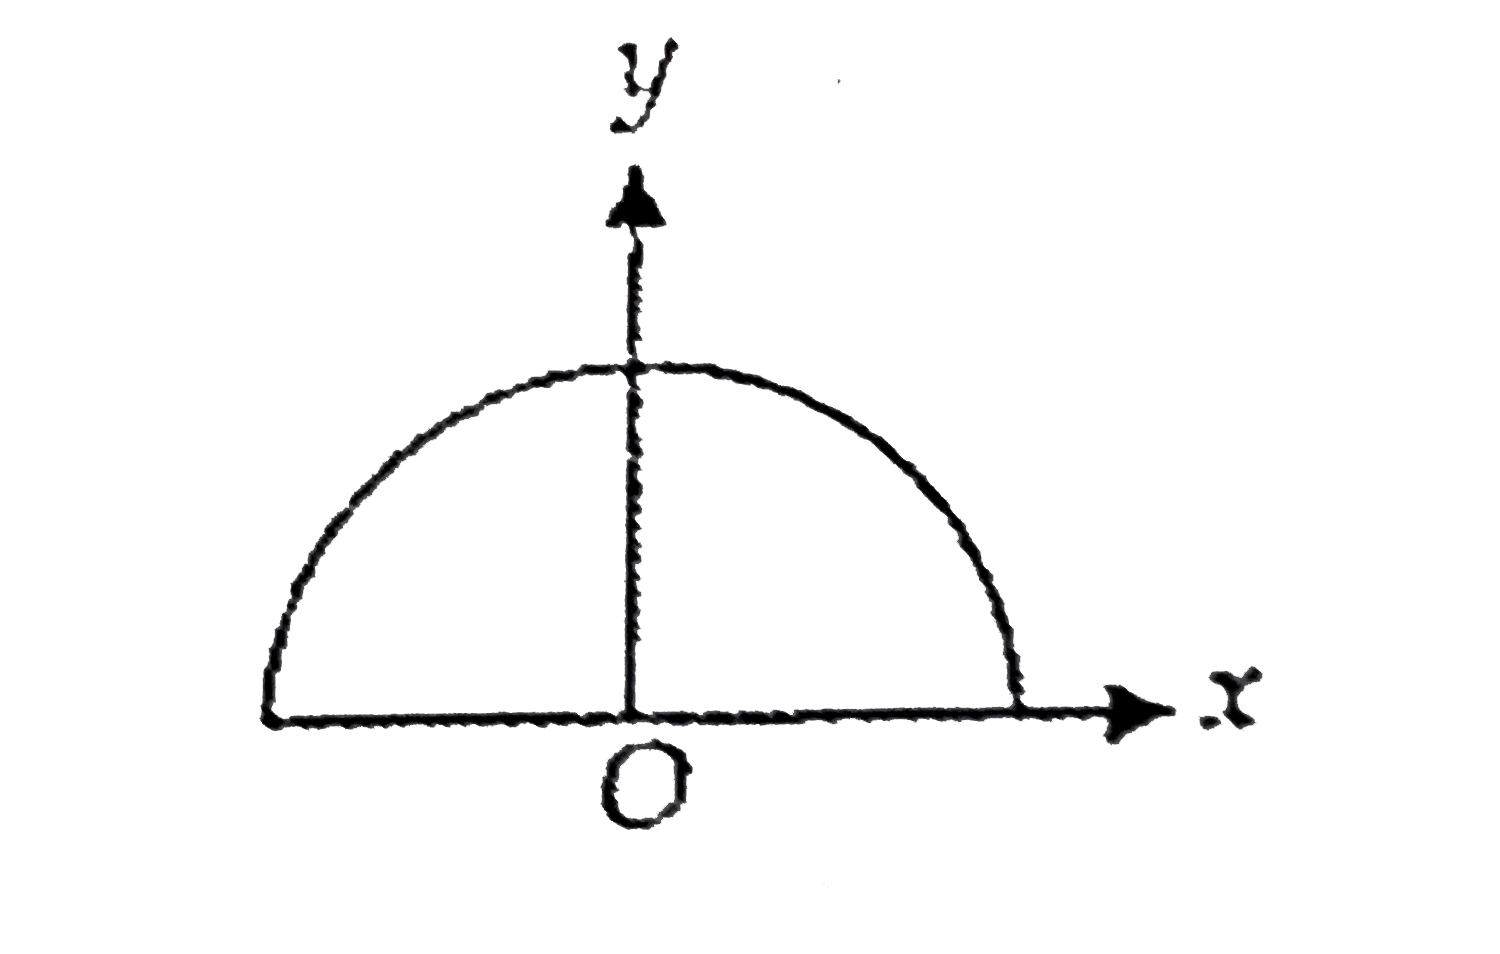 A wire of length l and mass m is bent in the form of a semicircle. The gravitational field intensity at the centre of semicircle is